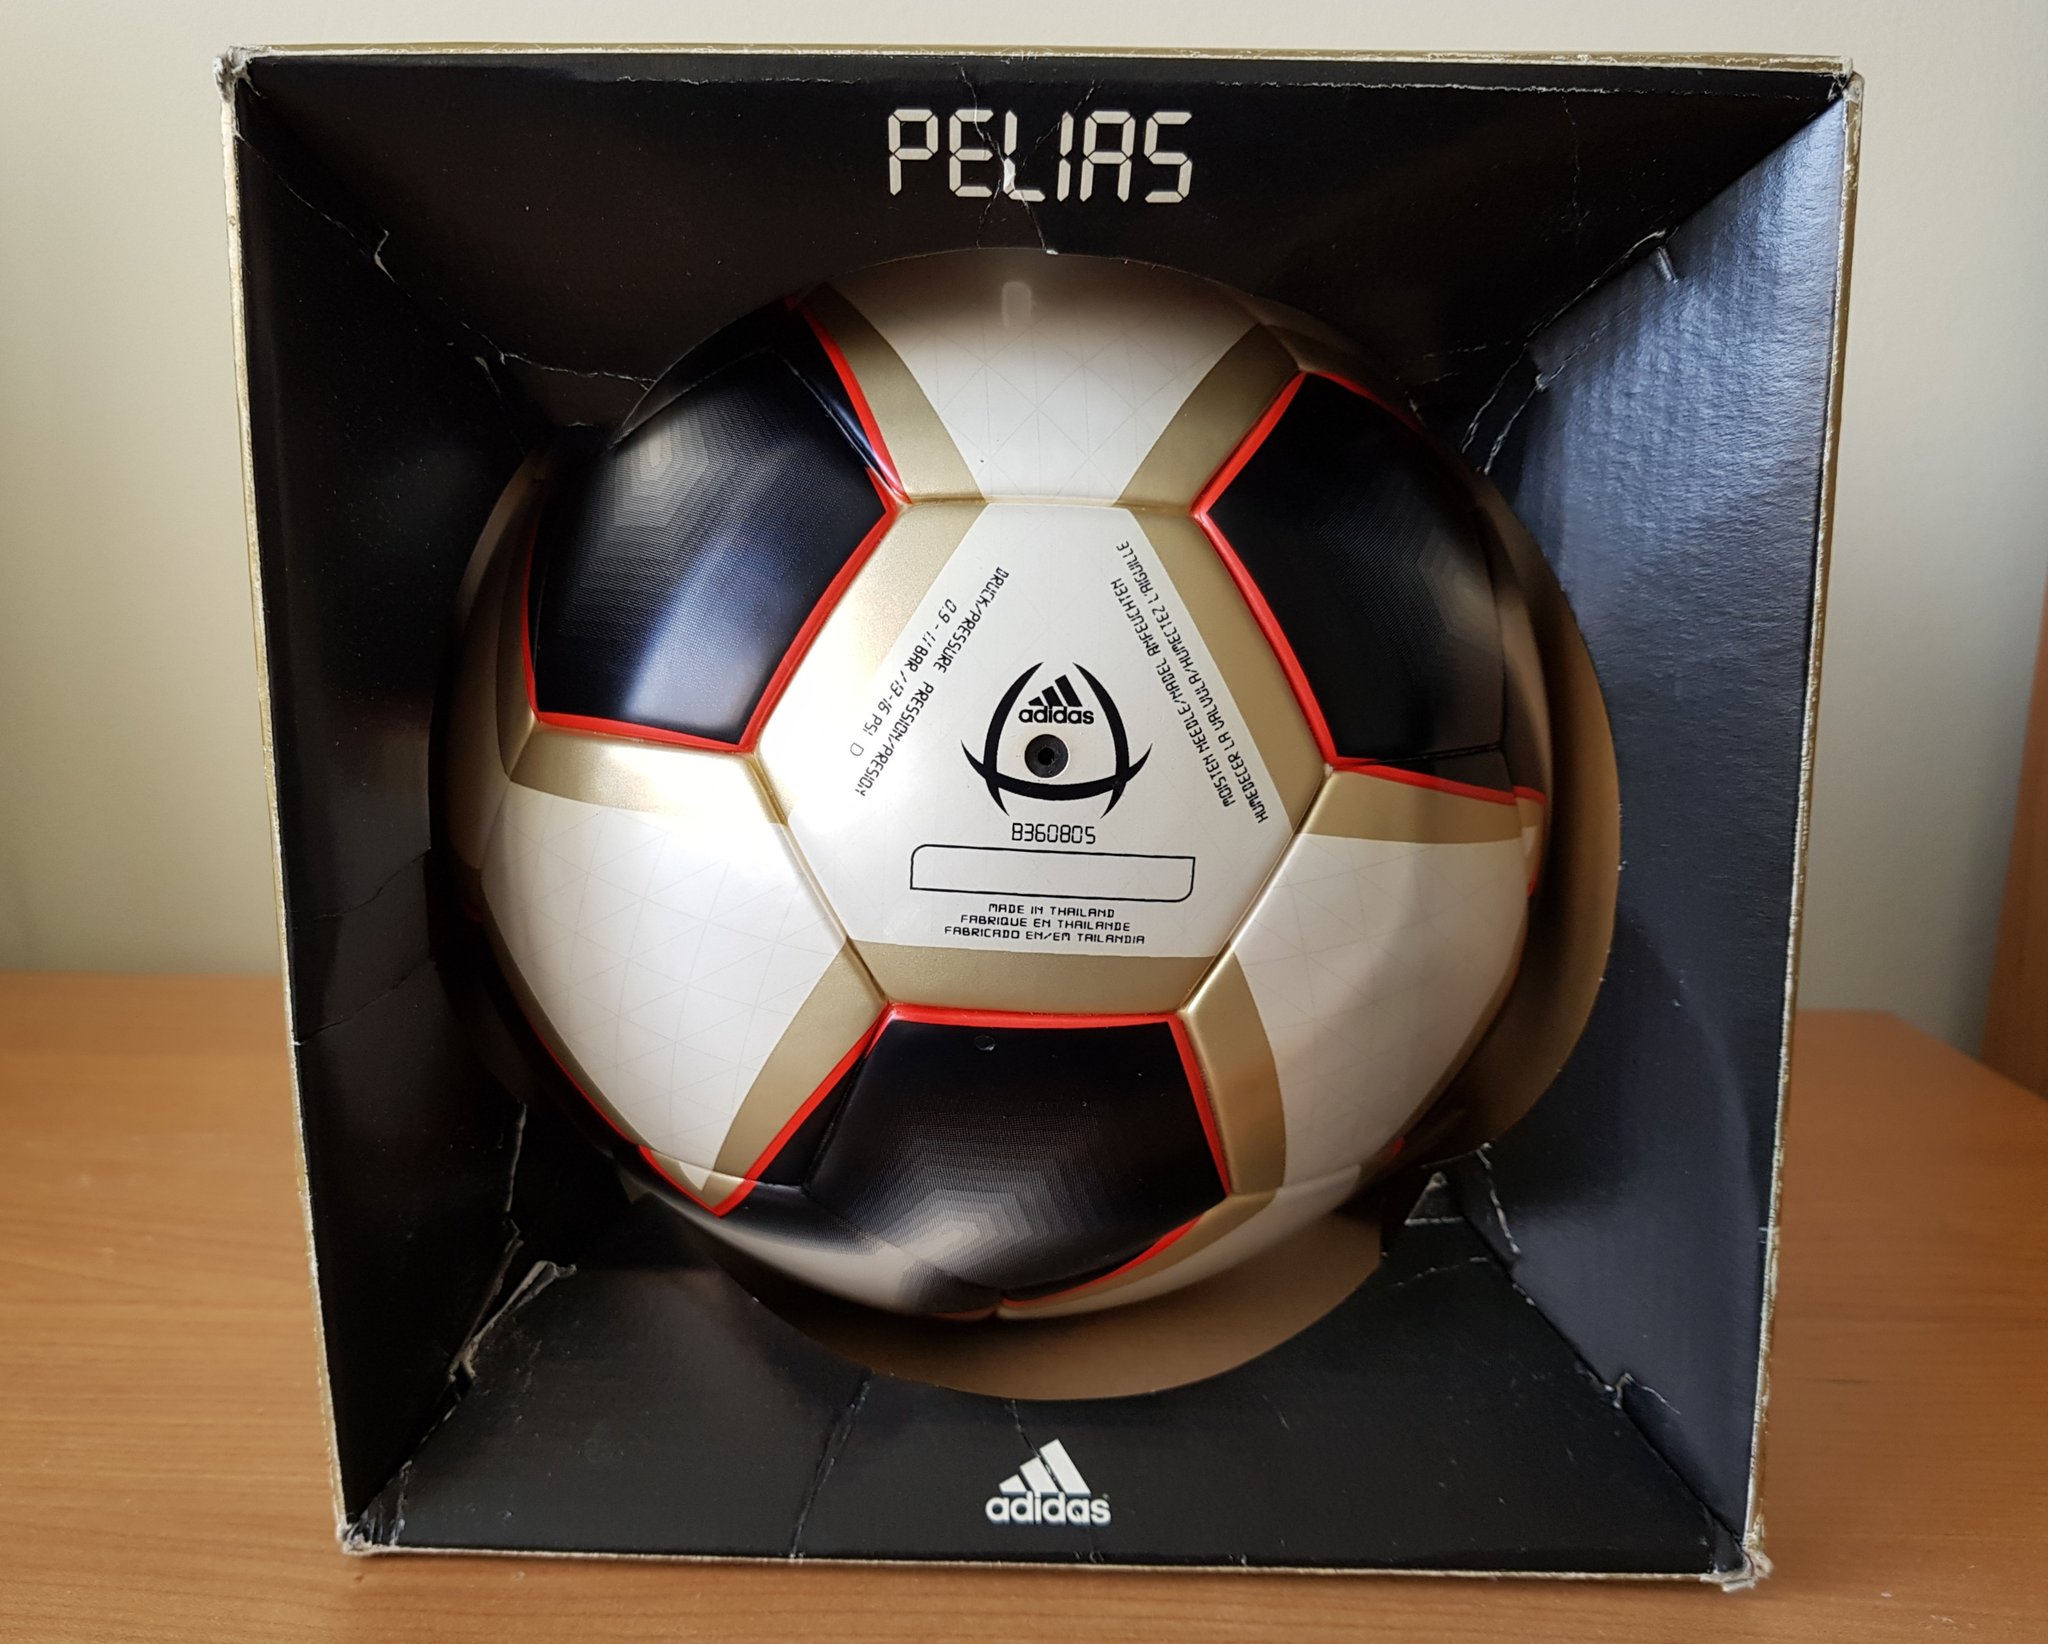 montaje utilizar Parecer Rob Filby on Twitter: "Adidas Pelias 2 - Confederations Cup 2005 Official  Match Ball and original box #adidaspelias #pelias2 #confederationscup  #confedcup #confedcup2005 #omb #fifa #officialmatchball  https://t.co/eO9JQNf4Rx" / Twitter